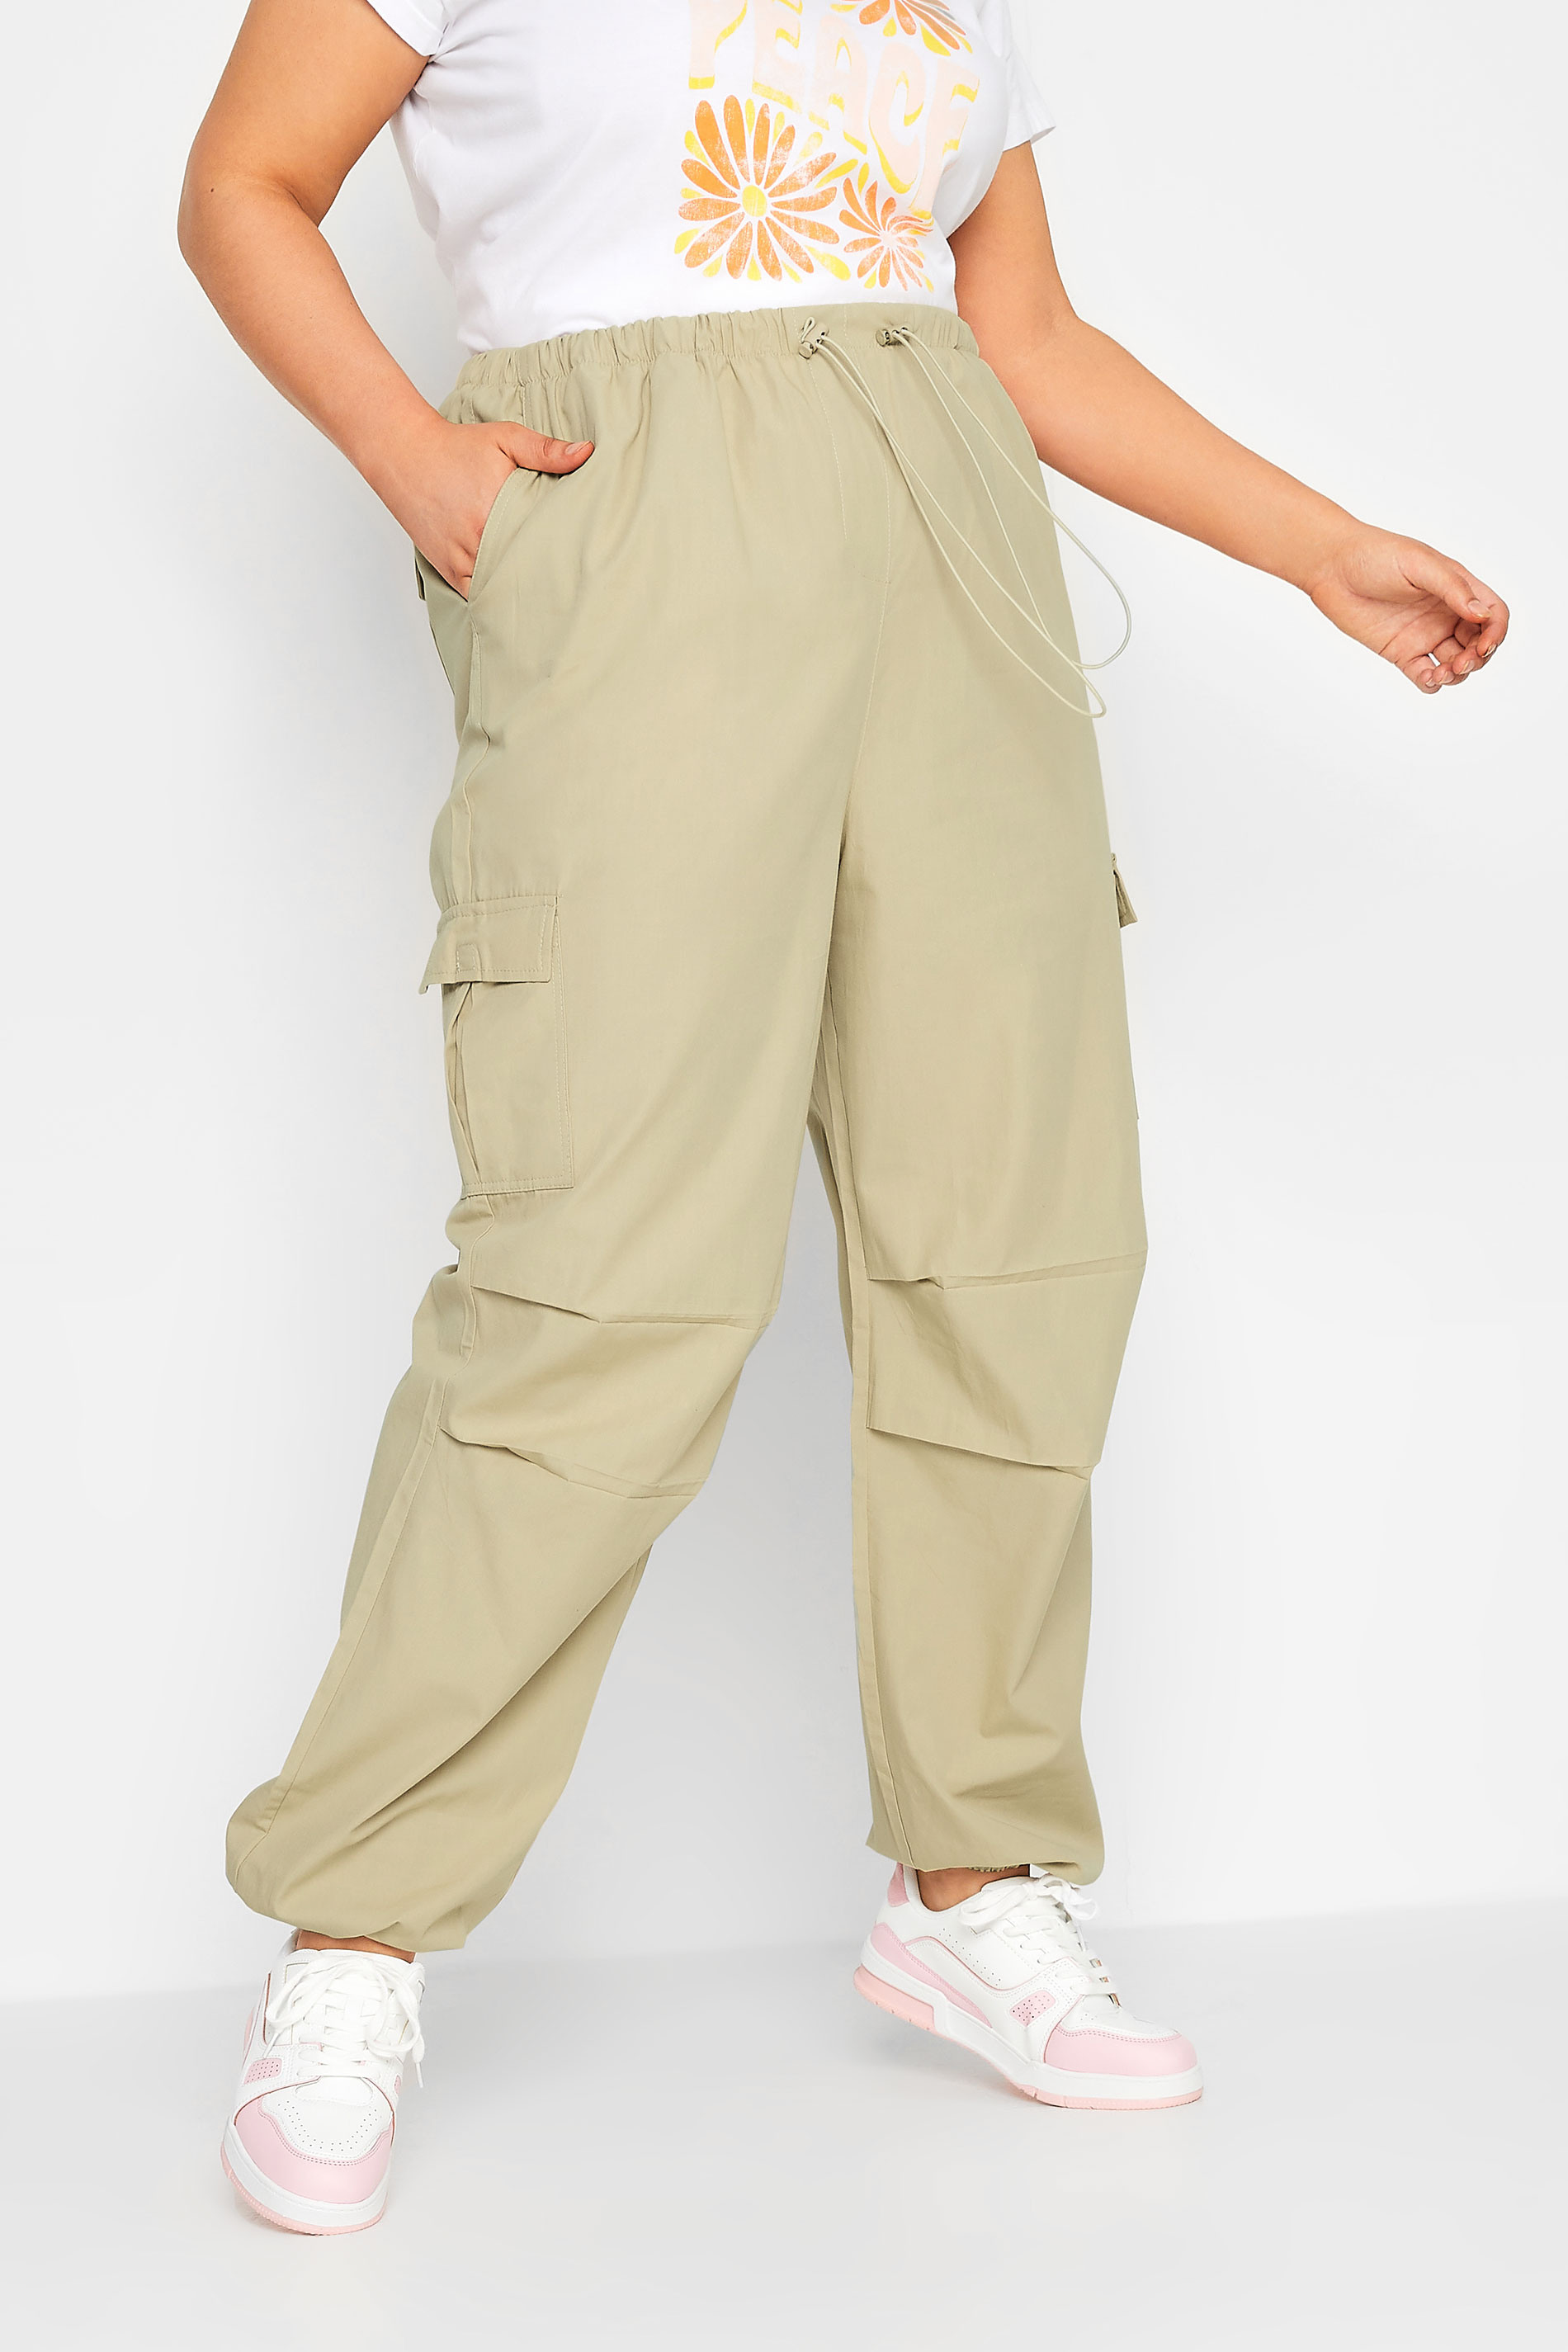 Pockets For Women - Yours Curve Brown Wide Leg Woven Cargo Trousers,  Women's Curve & Plus Size, Yours